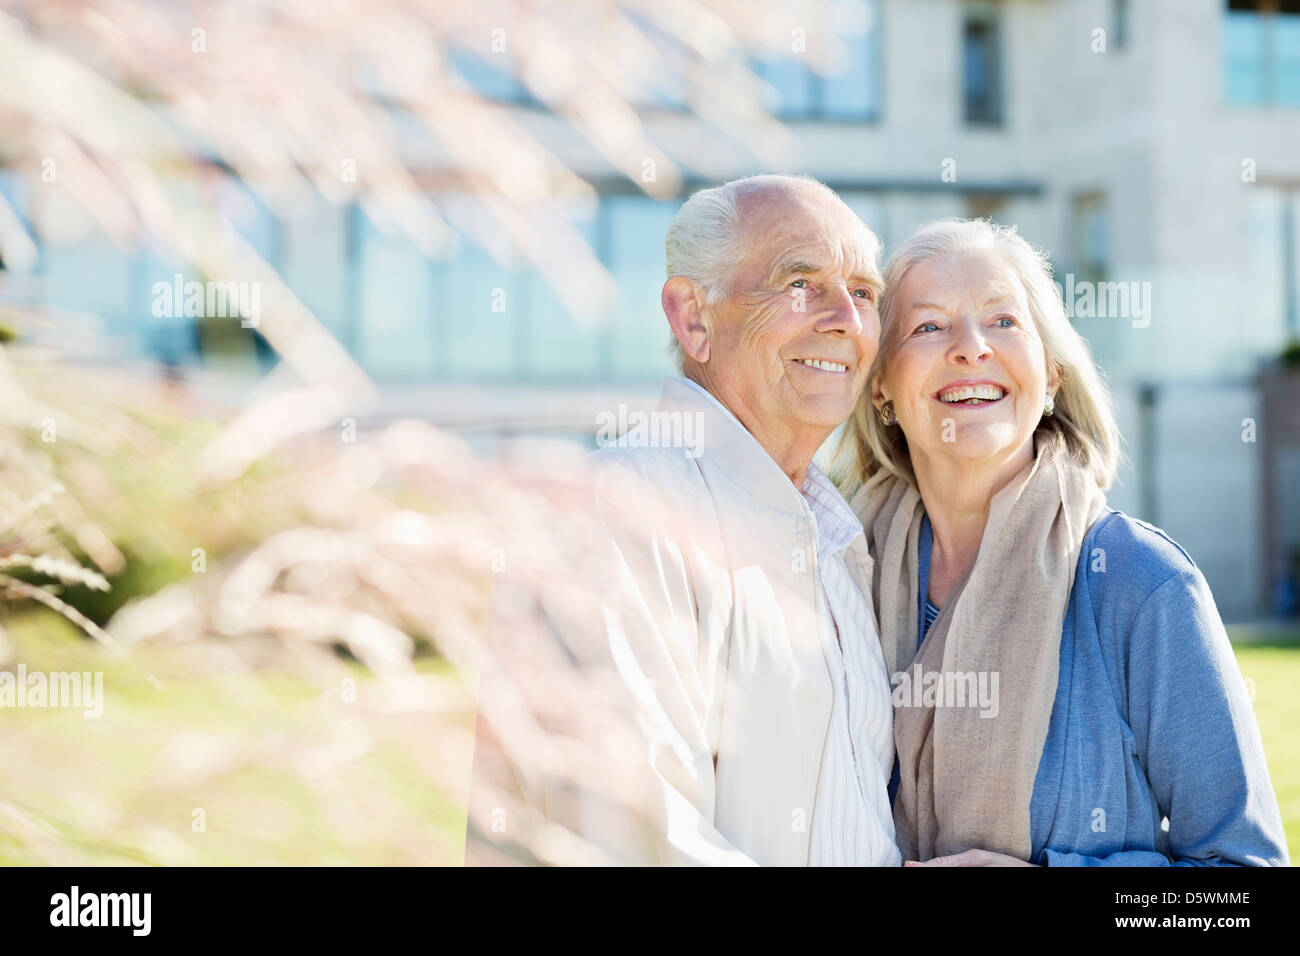 Older couple smiling outdoors Stock Photo